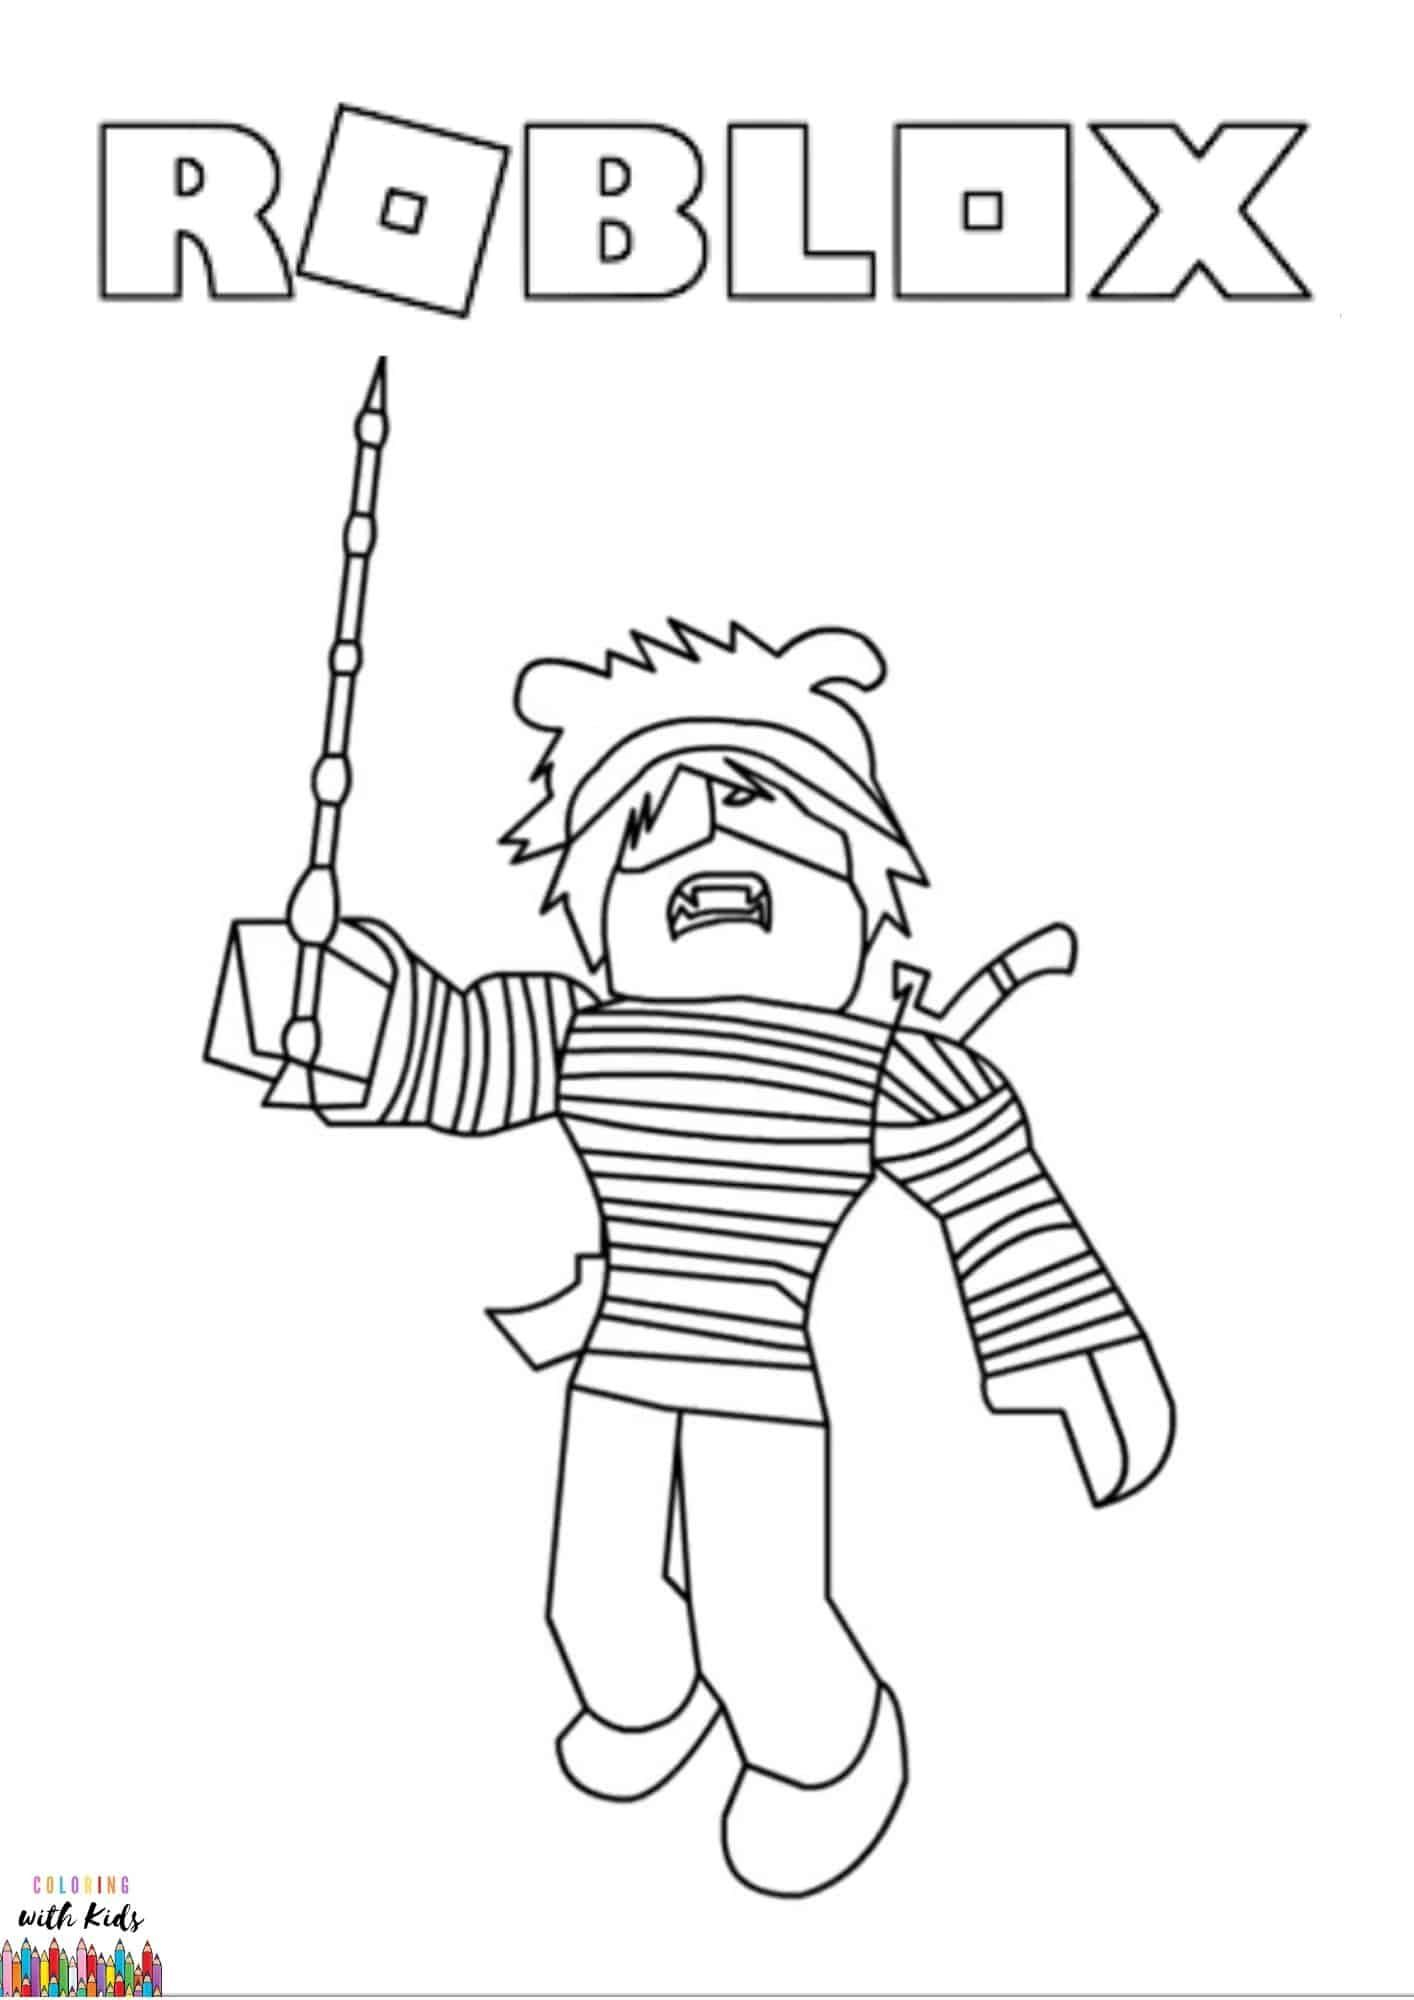 Roblox Coloring Page Image Credit: Roblox Avatar Drawing By Yadia serapportantà Roblox Dessin